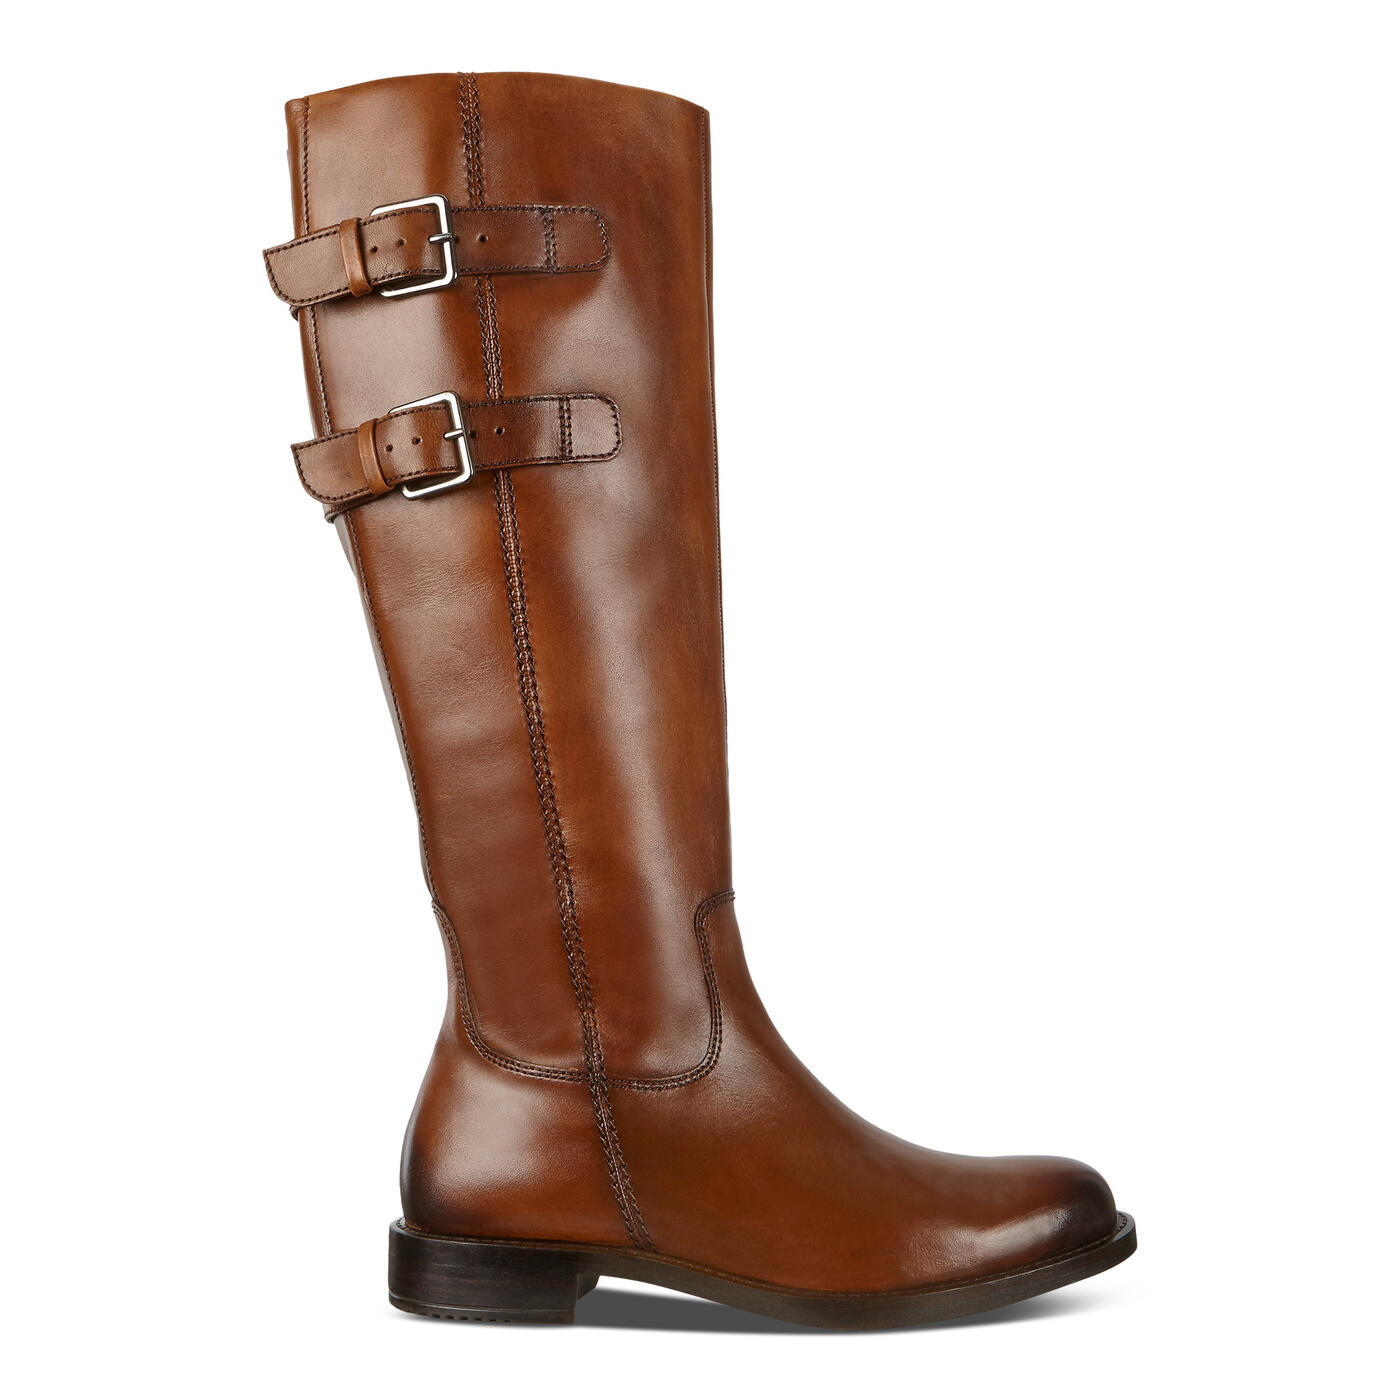 Sartorelle 25 Tall Buckle Boot | Women's Formal Boots | ECCO® Shoes